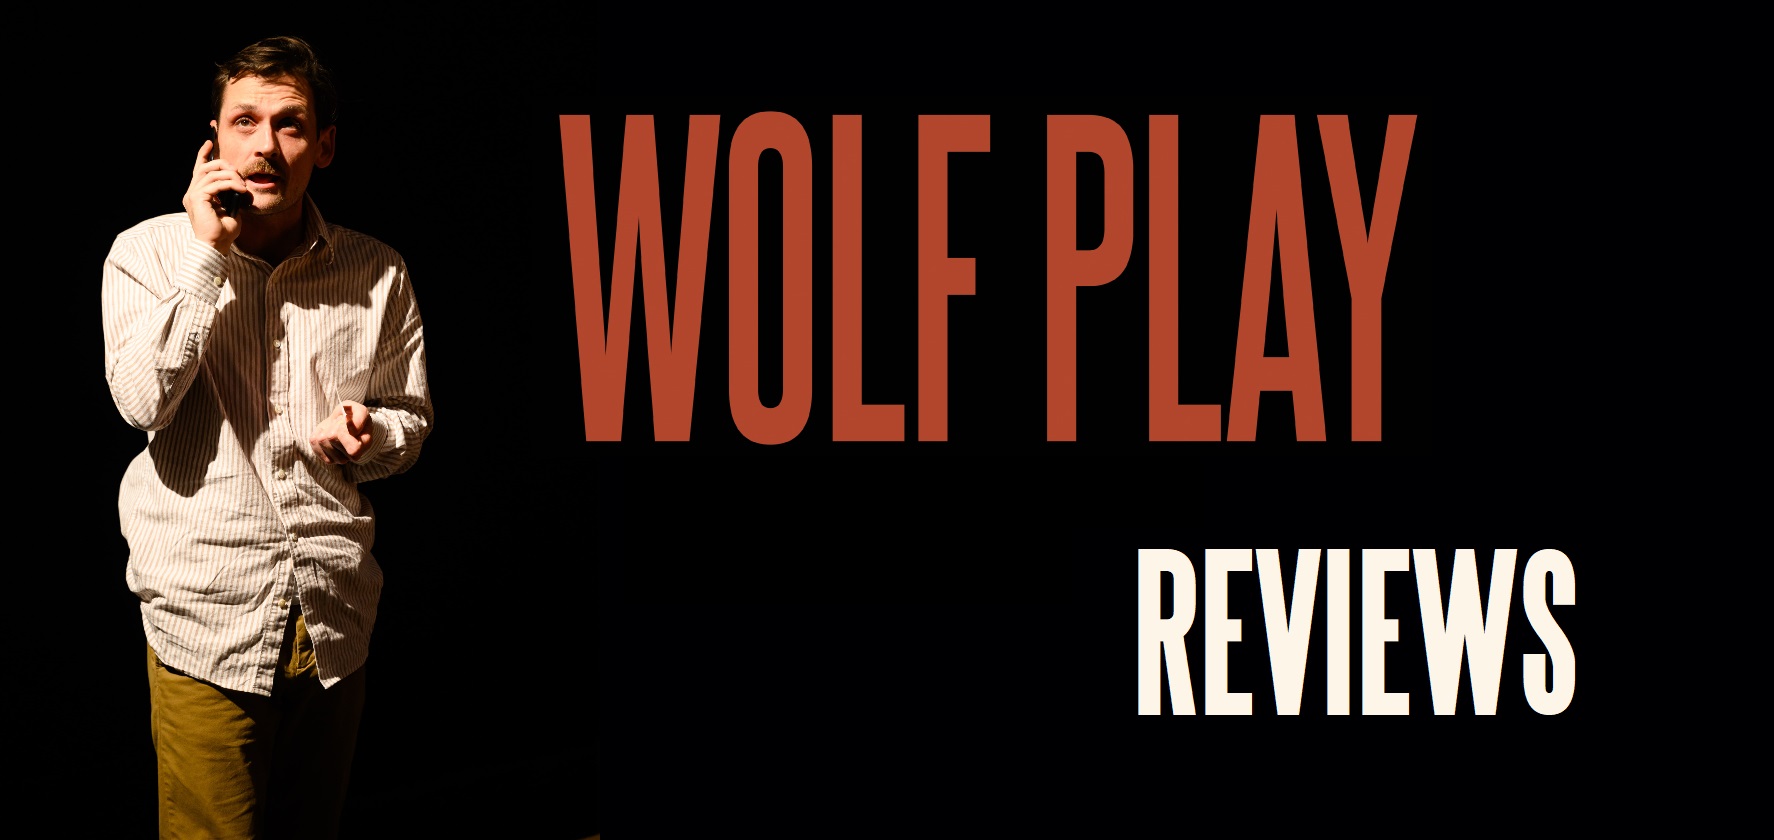 Wolf Play Reviews